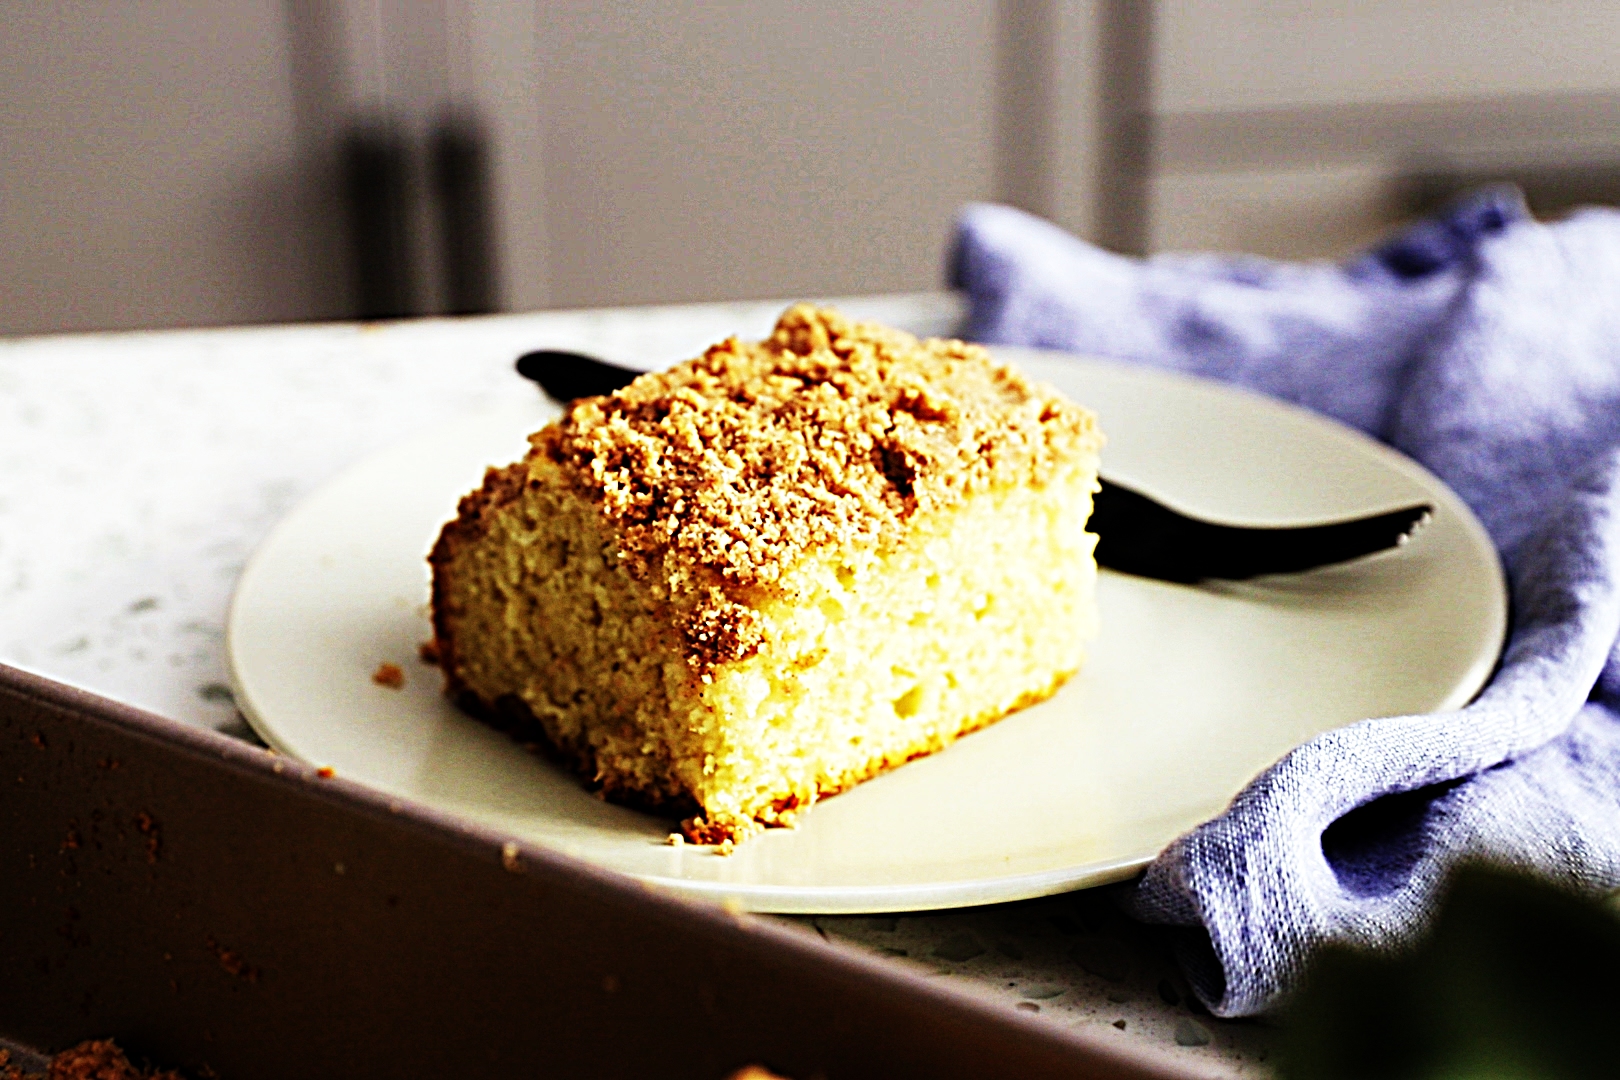 Stupid-Easy Recipe for Gluten-Free Coffee Cake (#1 Top-Rated)